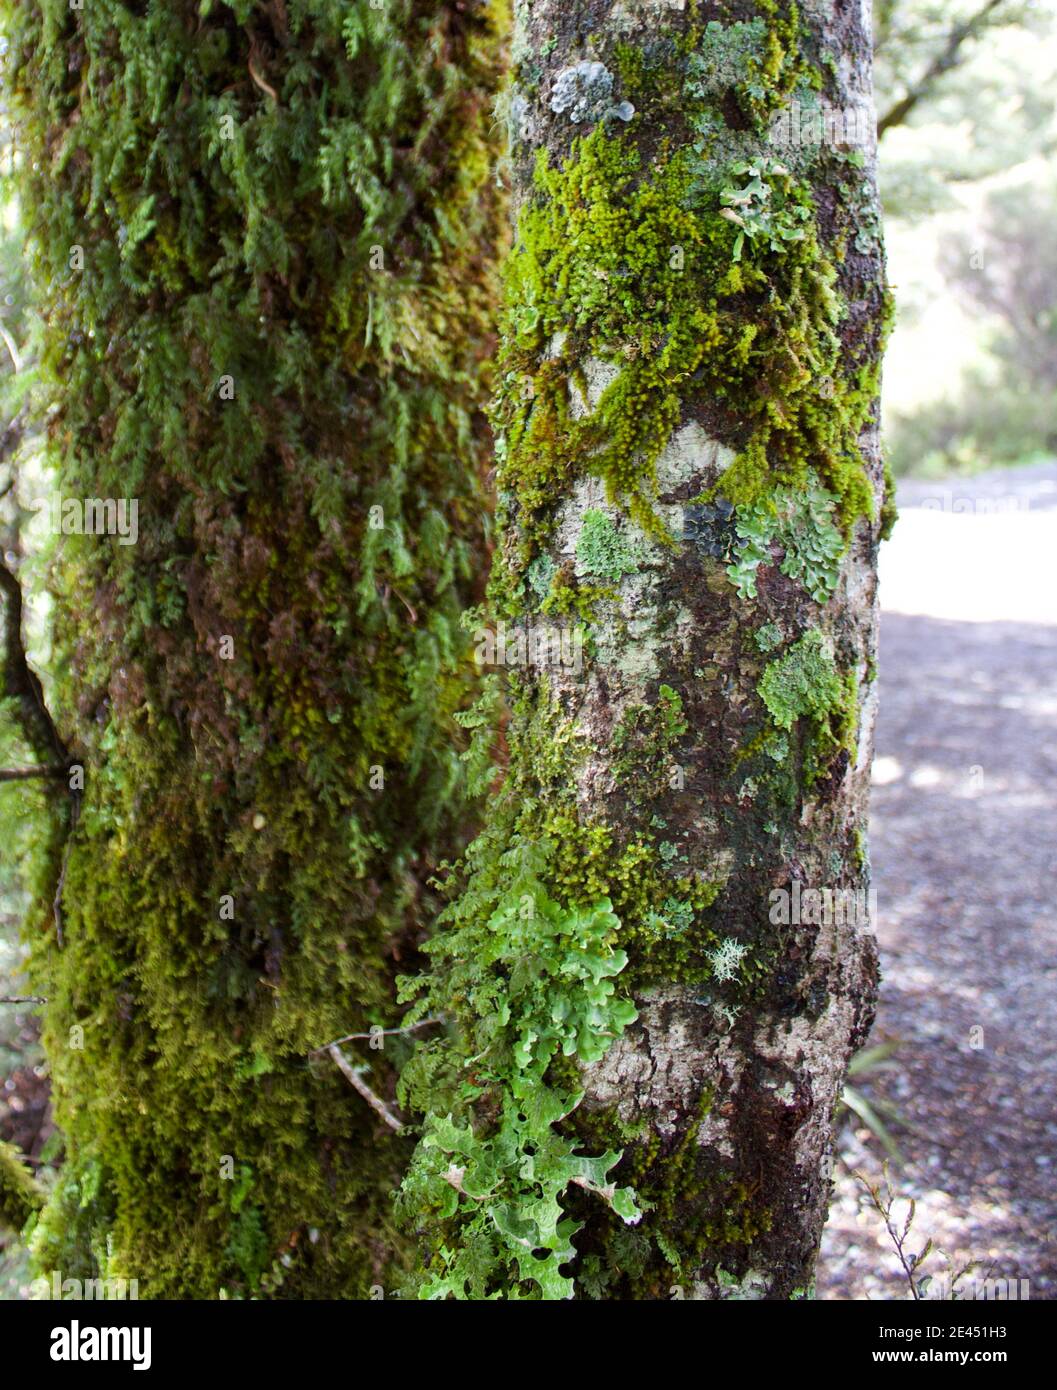 The Ecology and Diversity of a New Zealand Tree Stock Photo